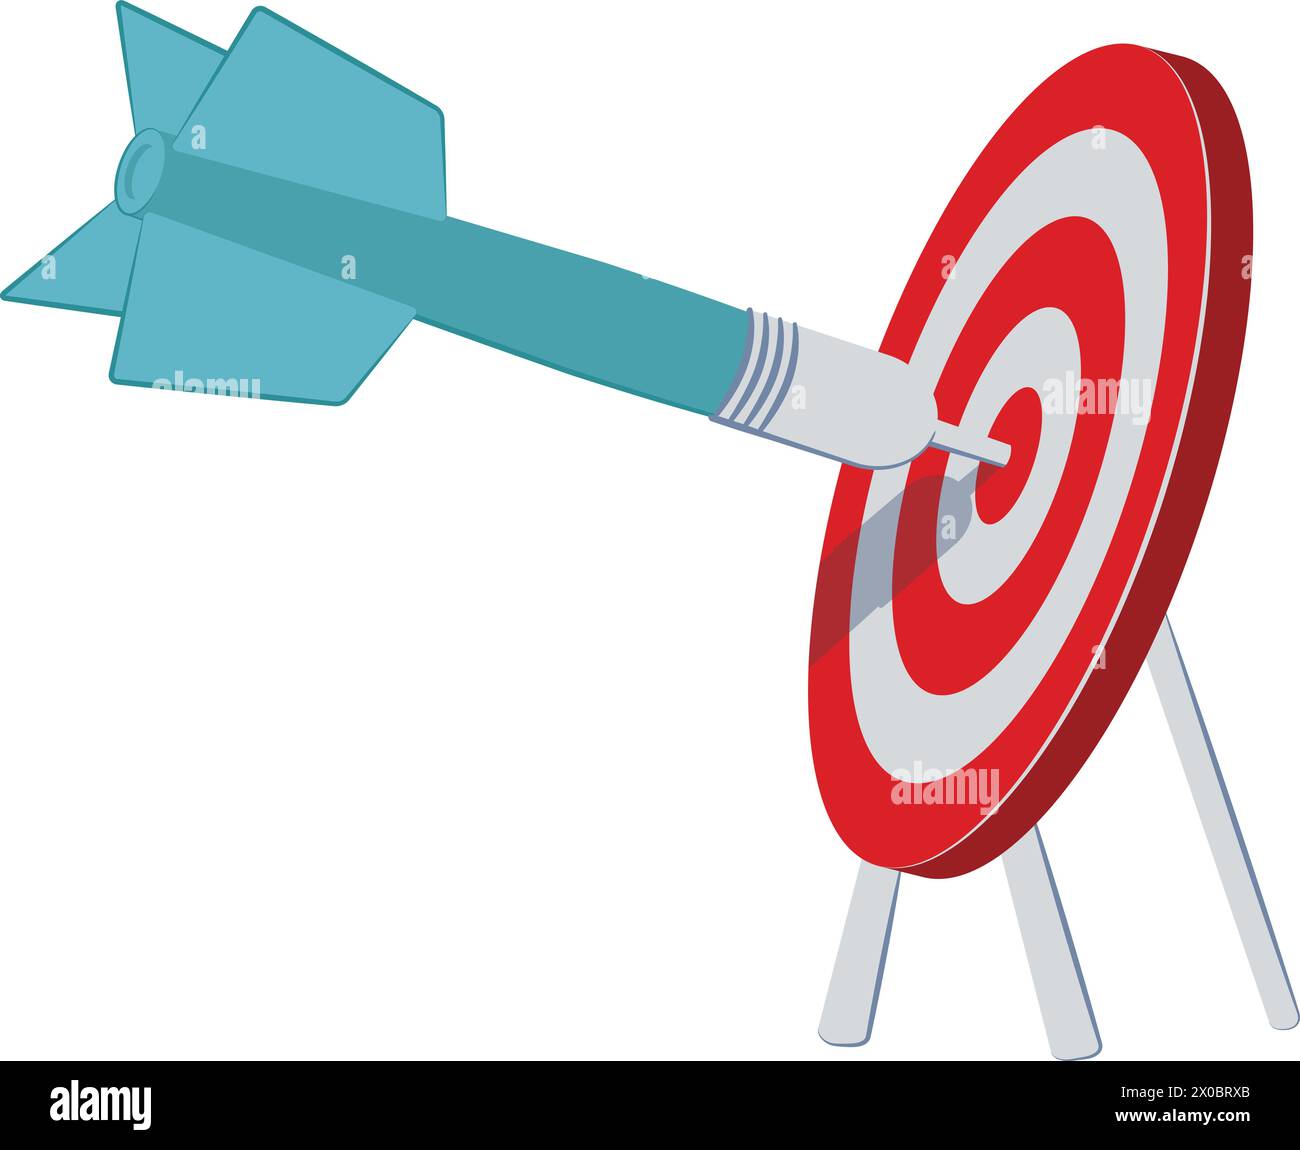 Illustration of a dart stuck in the center of a target. Stock Vector